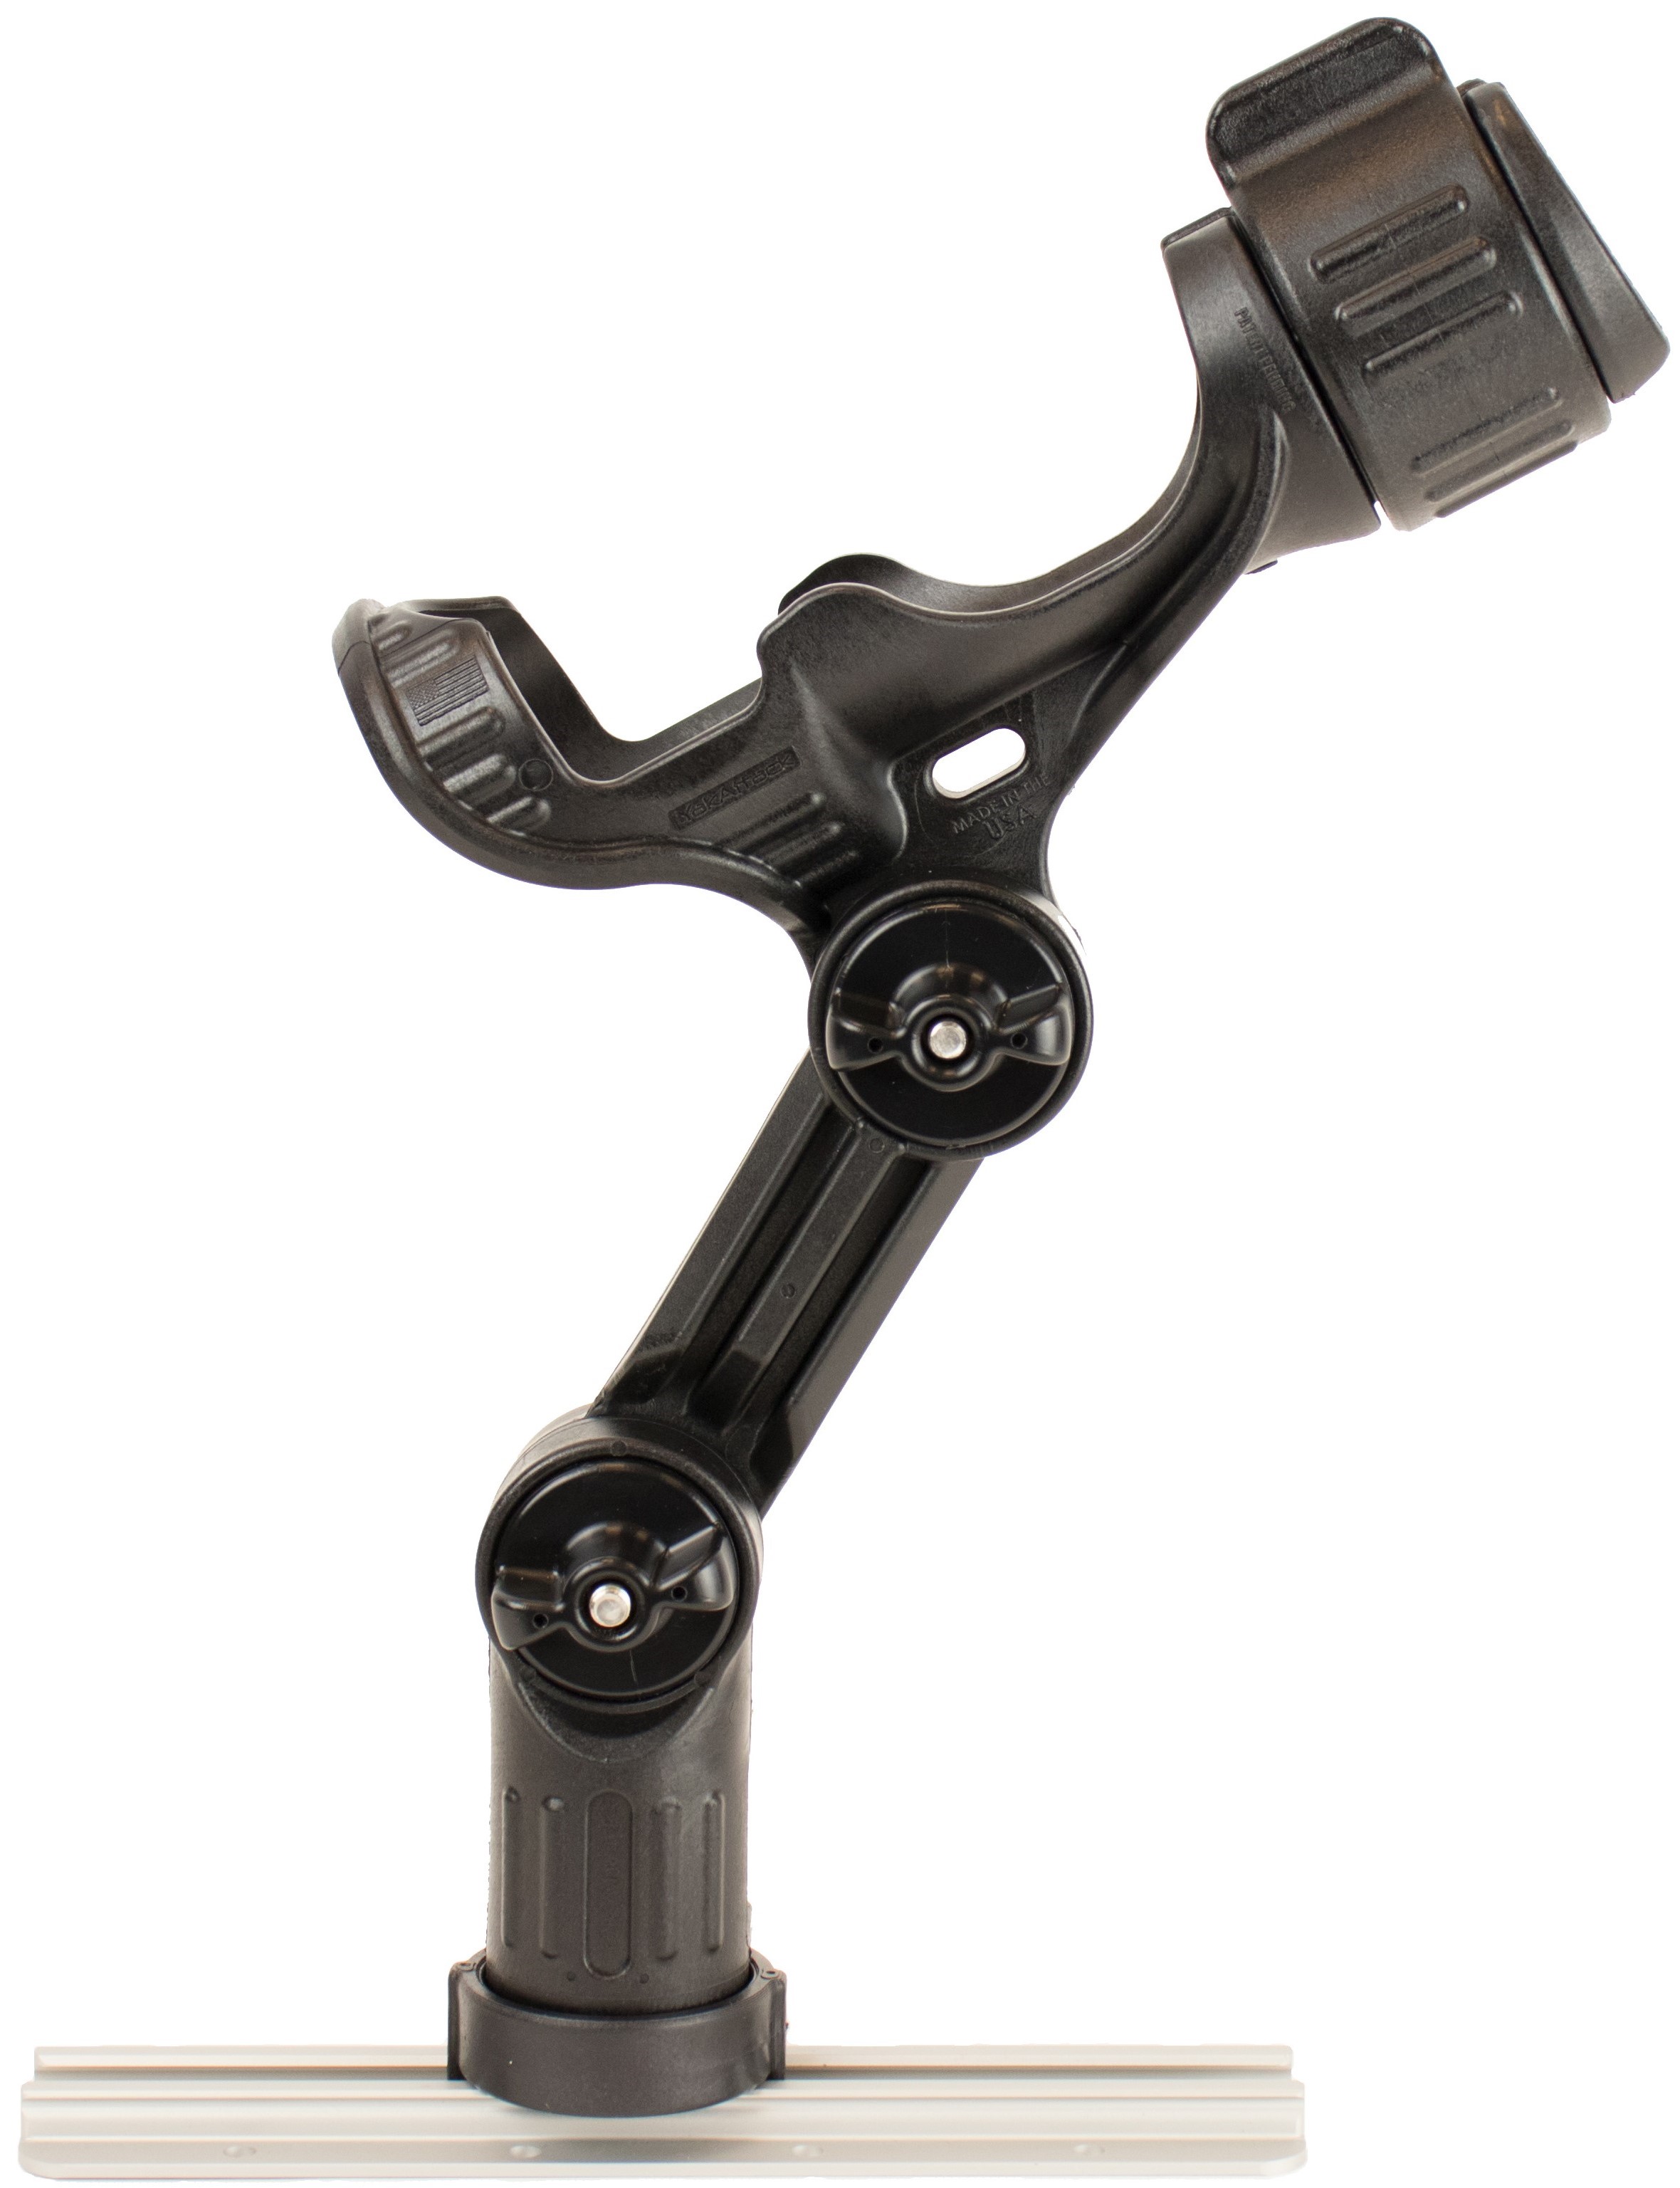 Mounts, Tracks & Accessories: Omega Pro Rod Holder by YakAttack - Image 4639